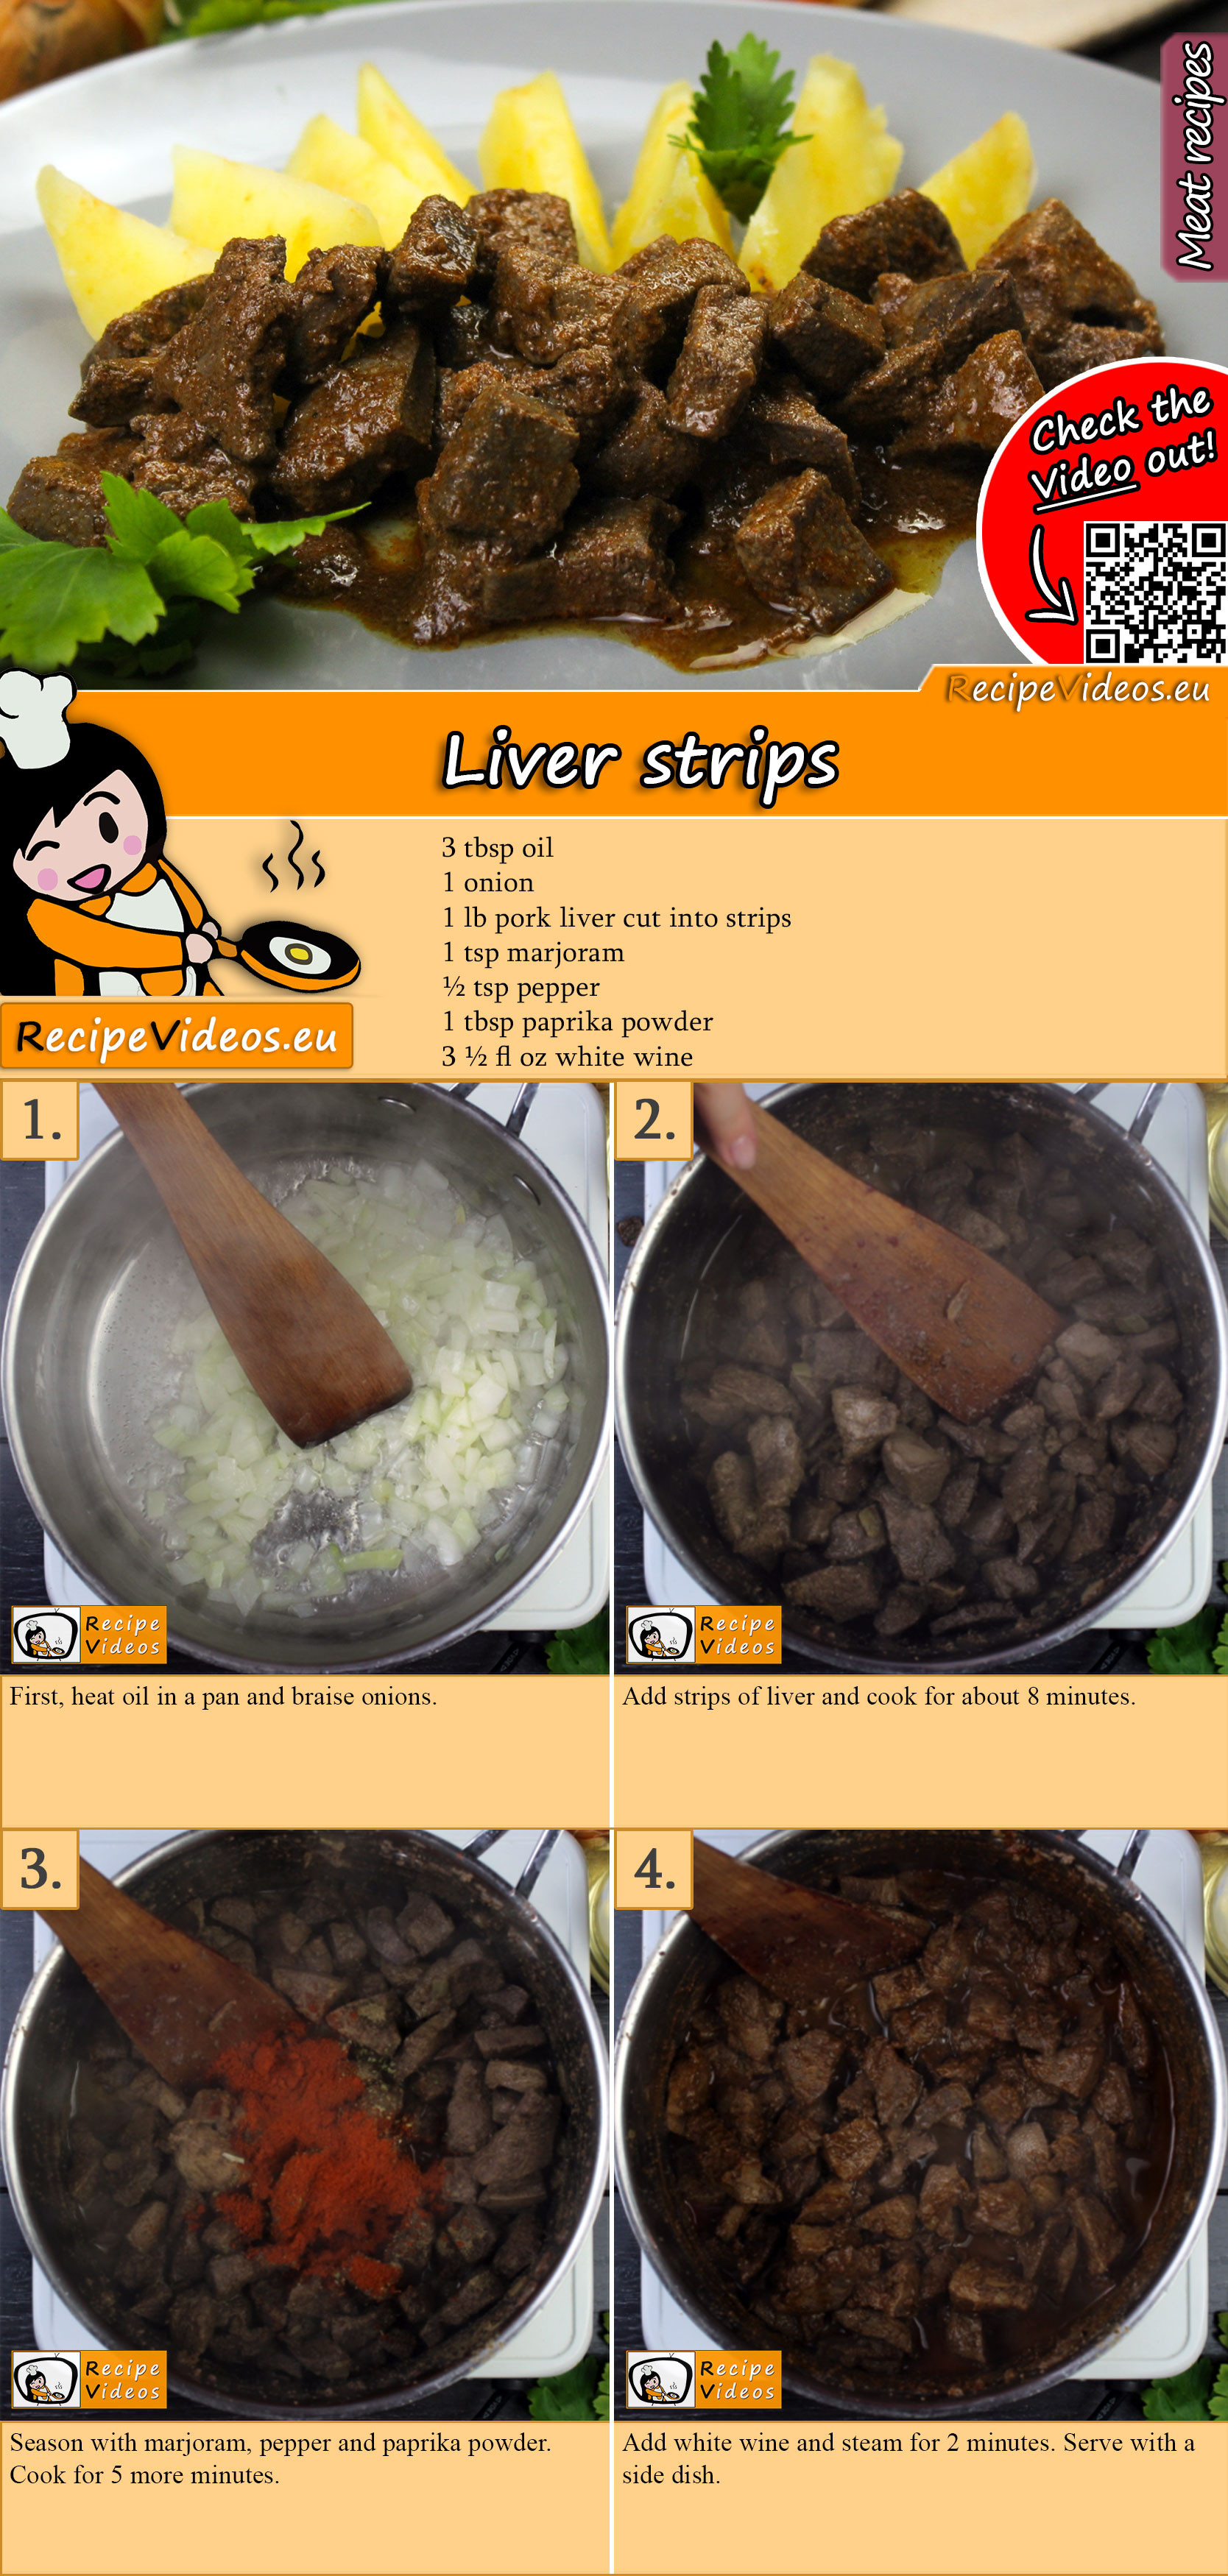 Liver strips recipe with video